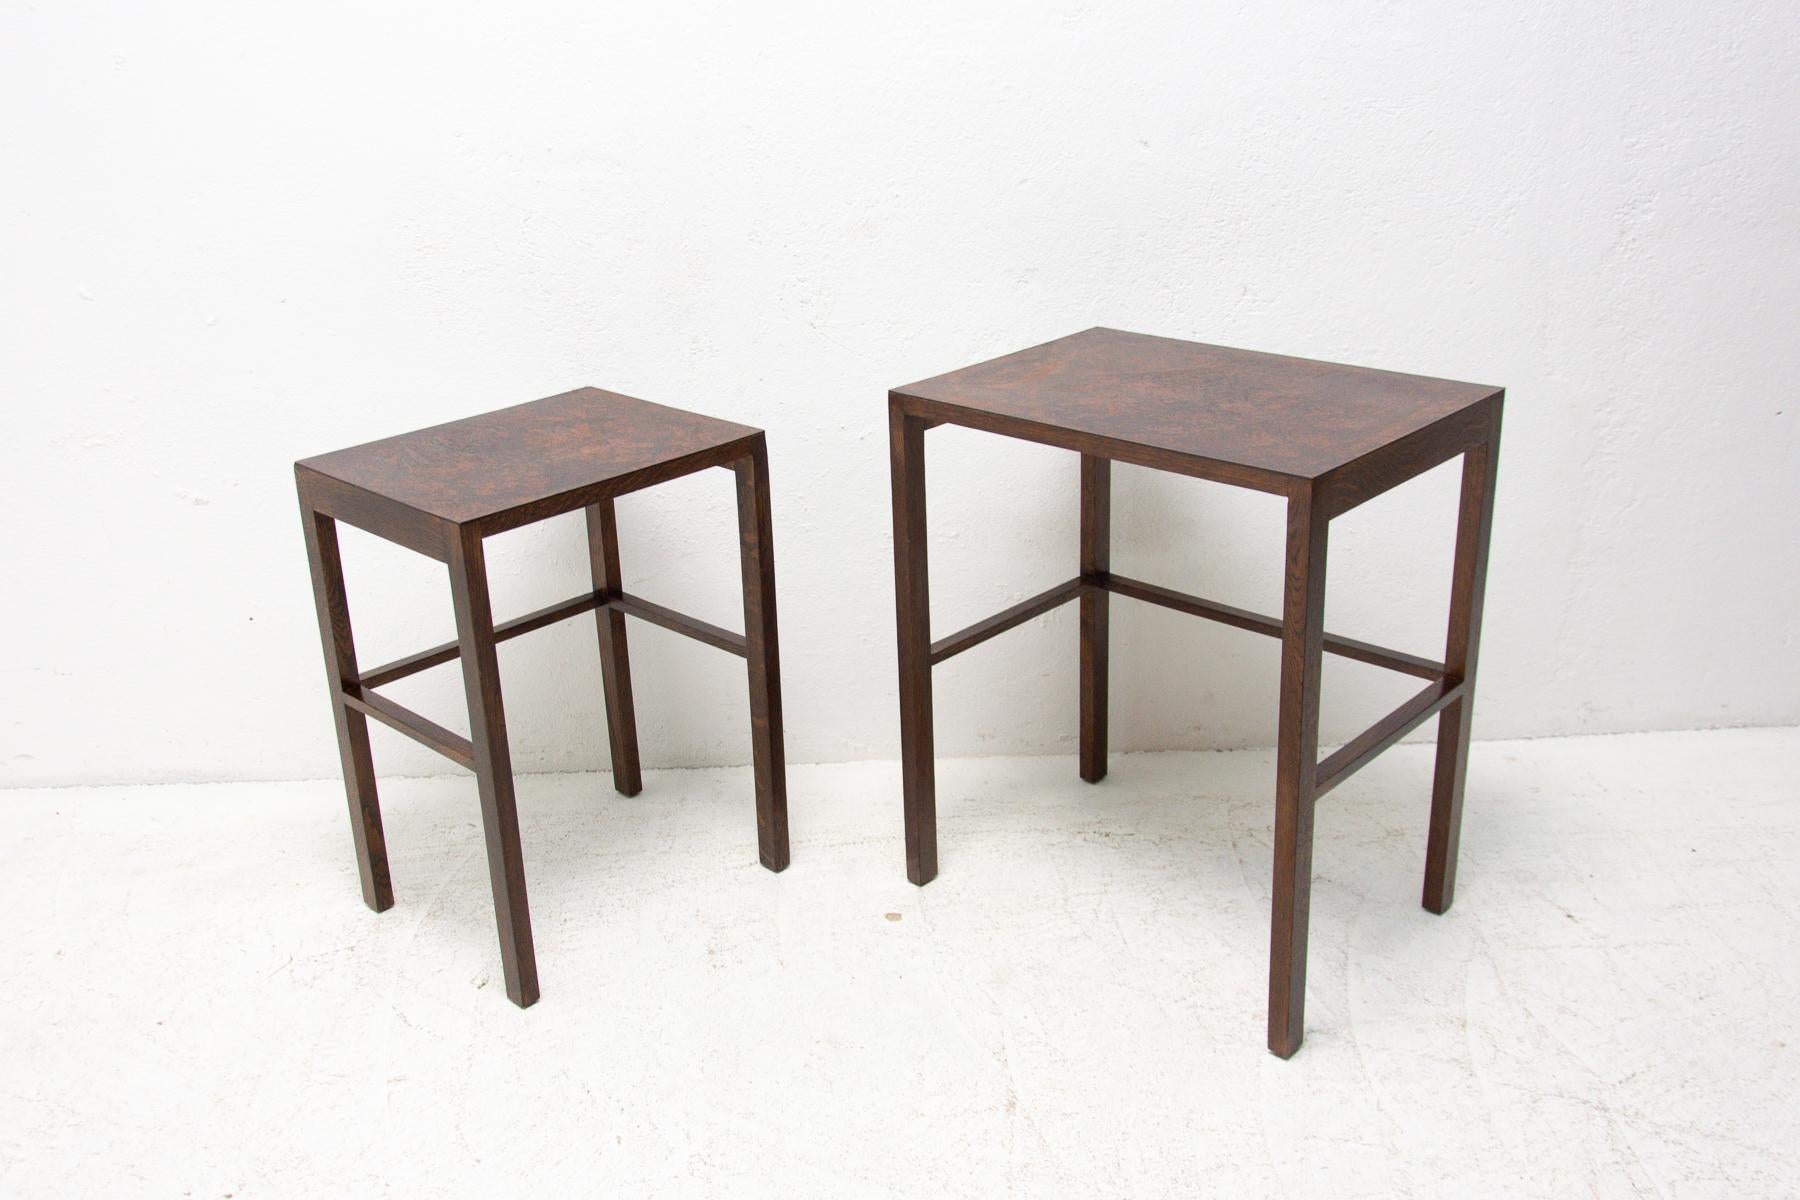 Jindrich Halabala, two tables from the famous set of three nesting tables catalogue no. H-50, designed in the 1930s and produced in the 1950s. It´s made of stained beech wood and it features a dark bakelite top. It is in good vintage condition,